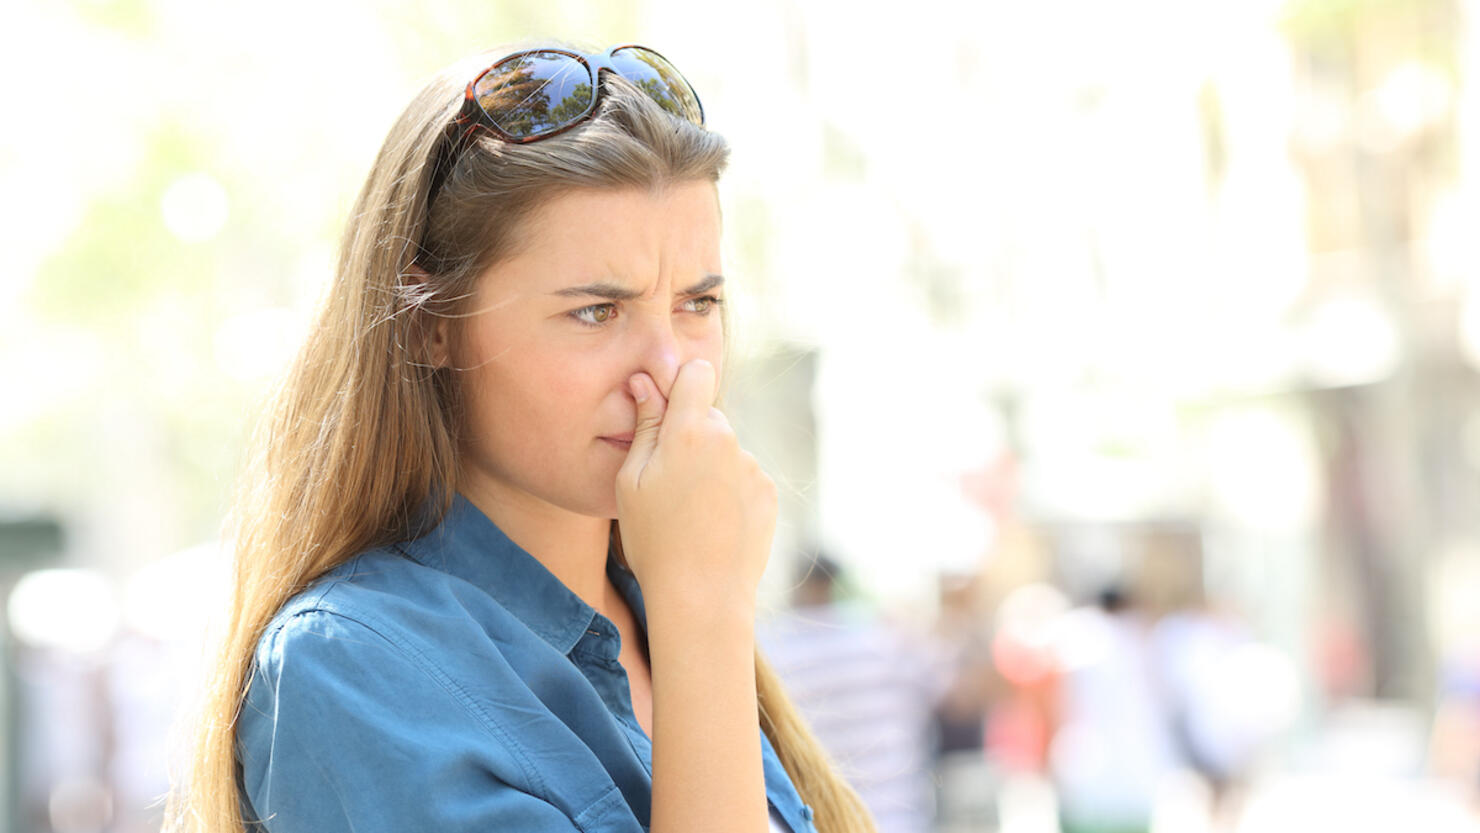 Girl covering her nose due to bad odour